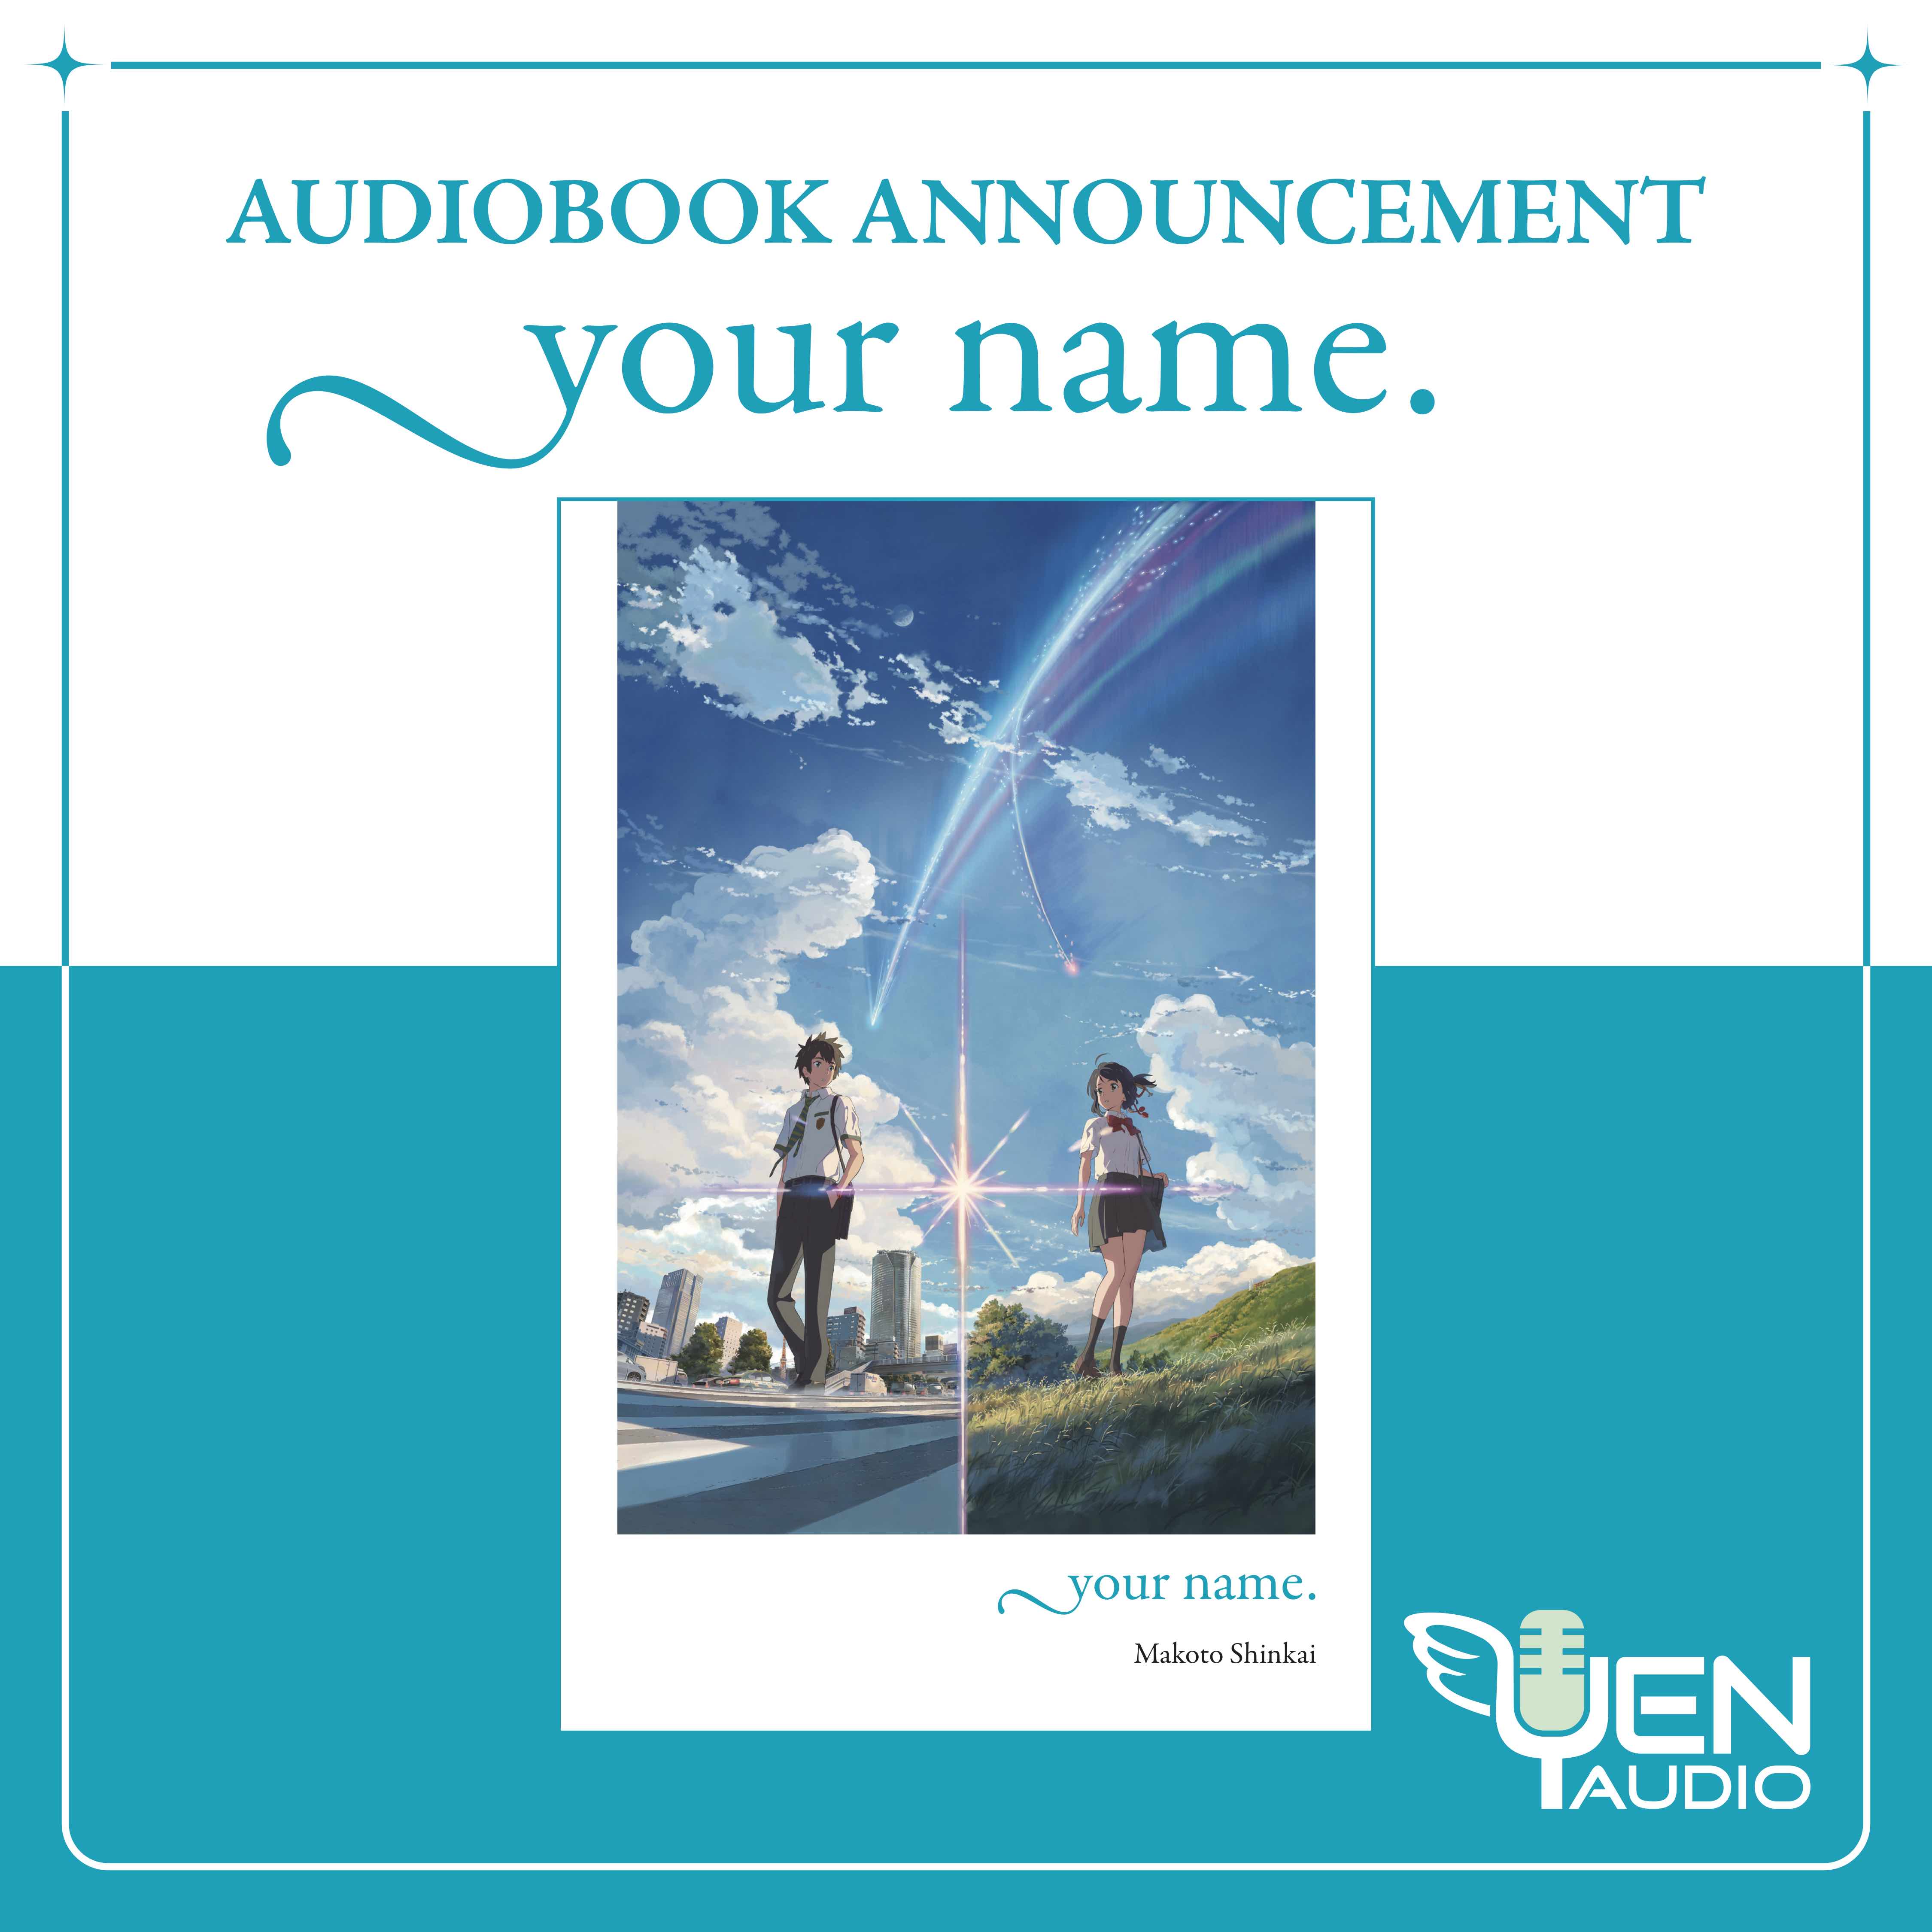 Yen Audio Announces the Audiobook Adaptation of your name.